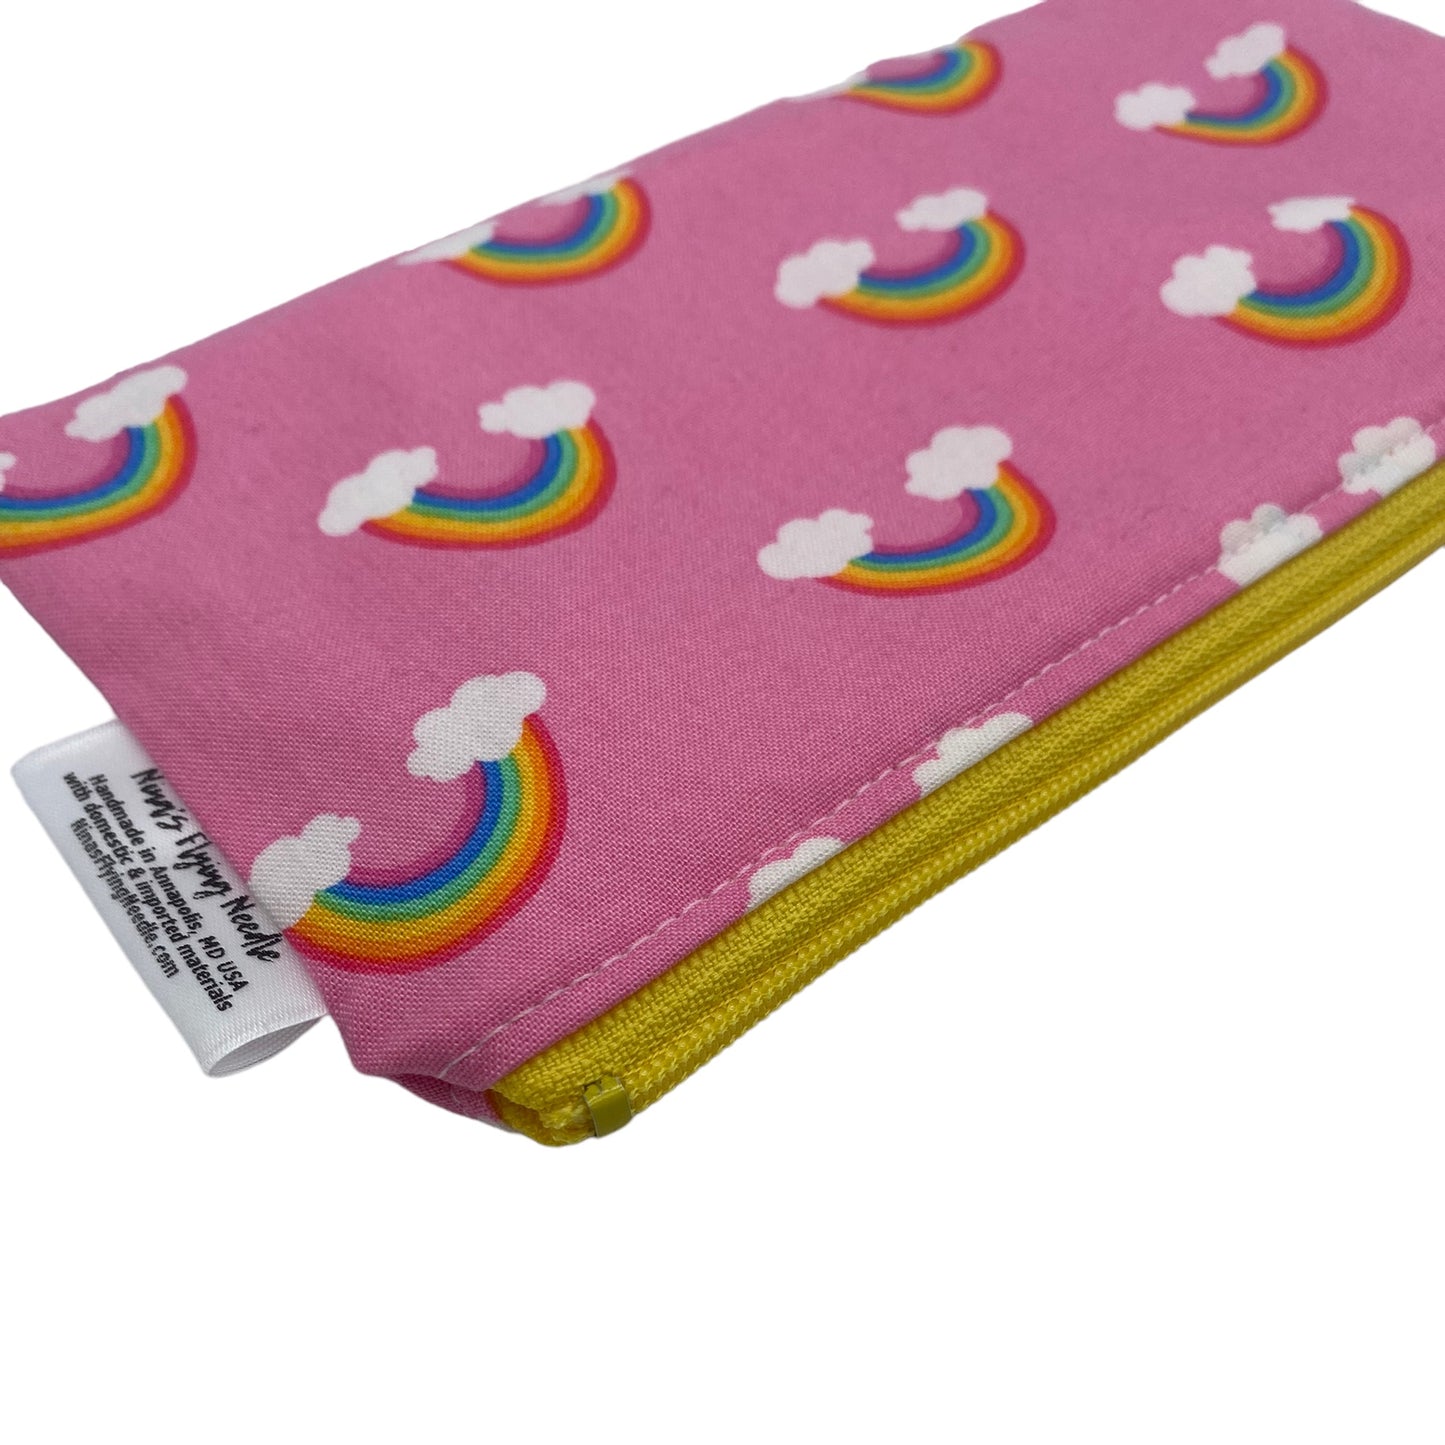 Knick Knack Sized Reusable Zippered Bag Rainbow on Clouds